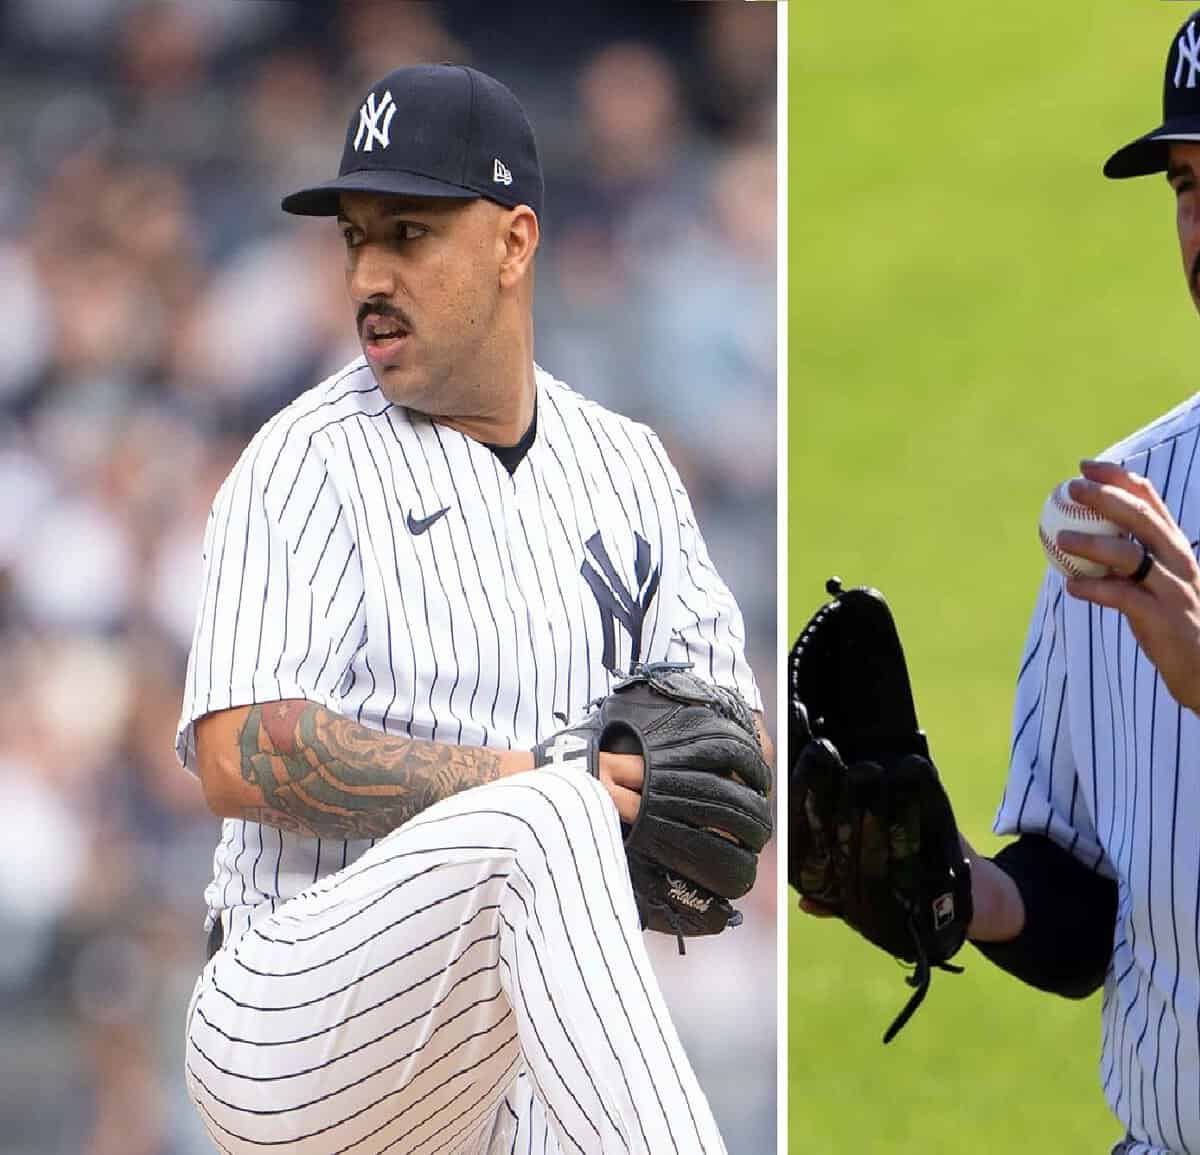 BREAKING: Yankees' Nestor Cortes picks up injury, bows out of